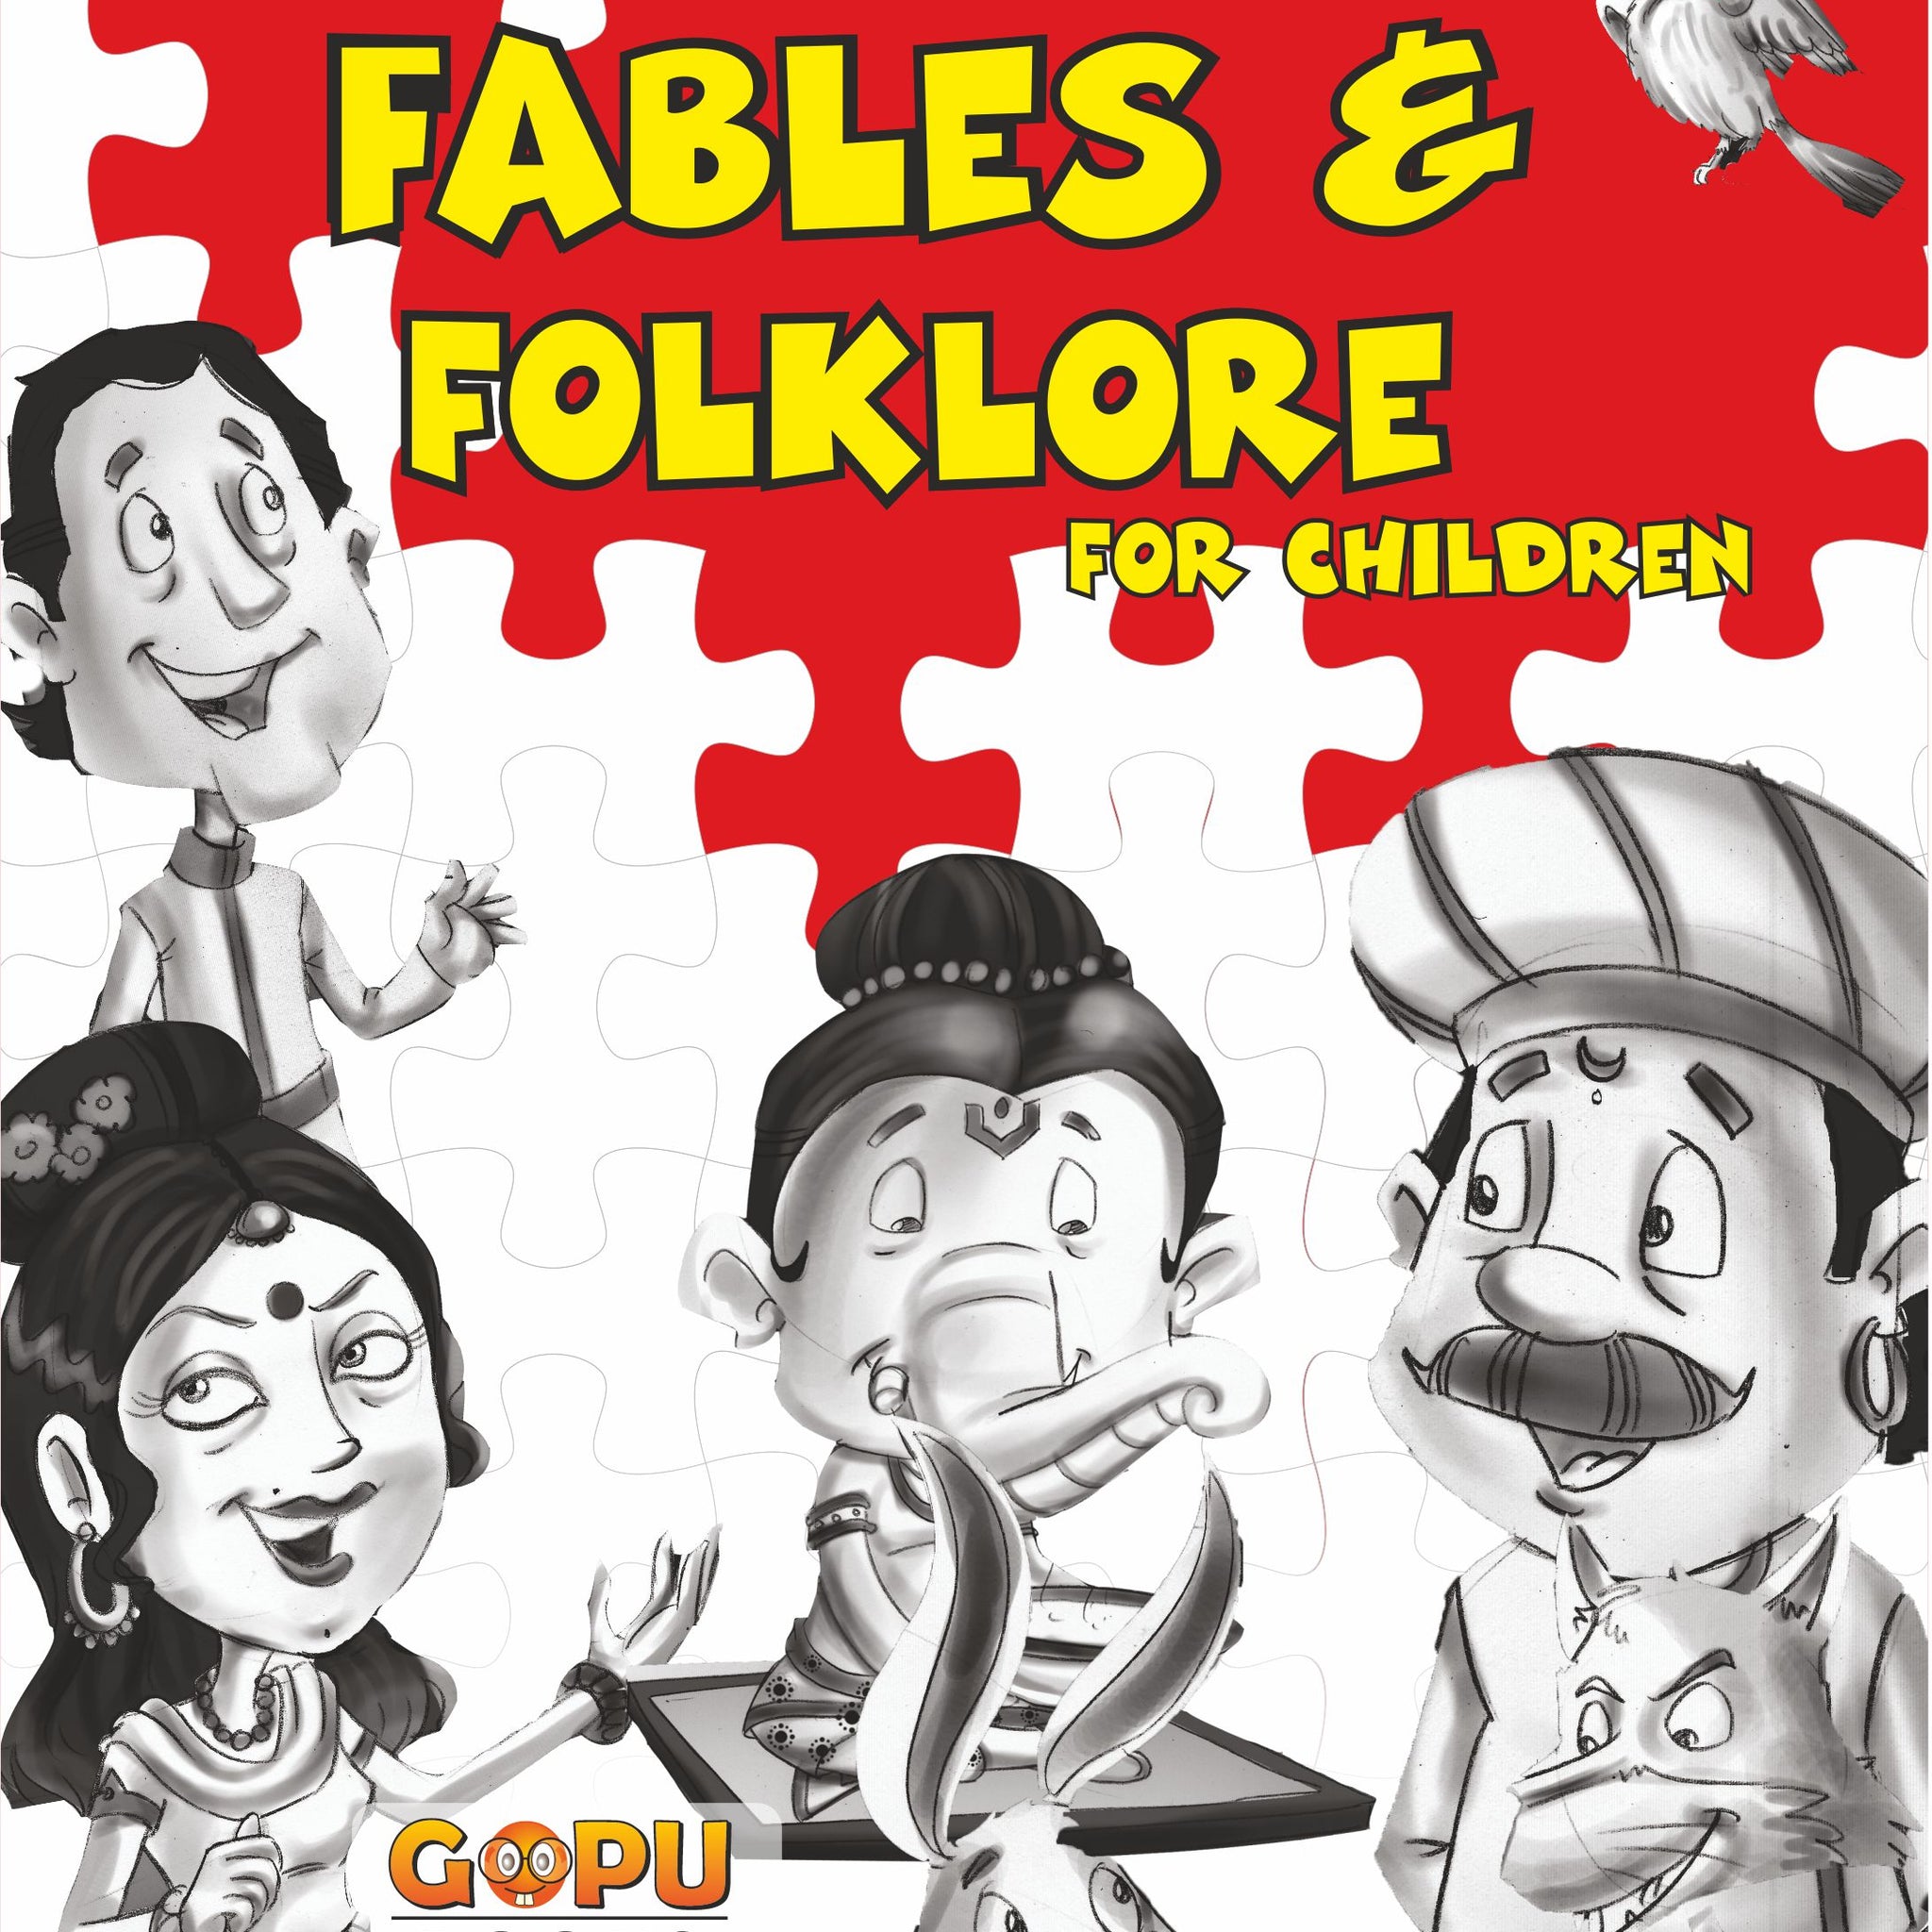 Fables & Folklore